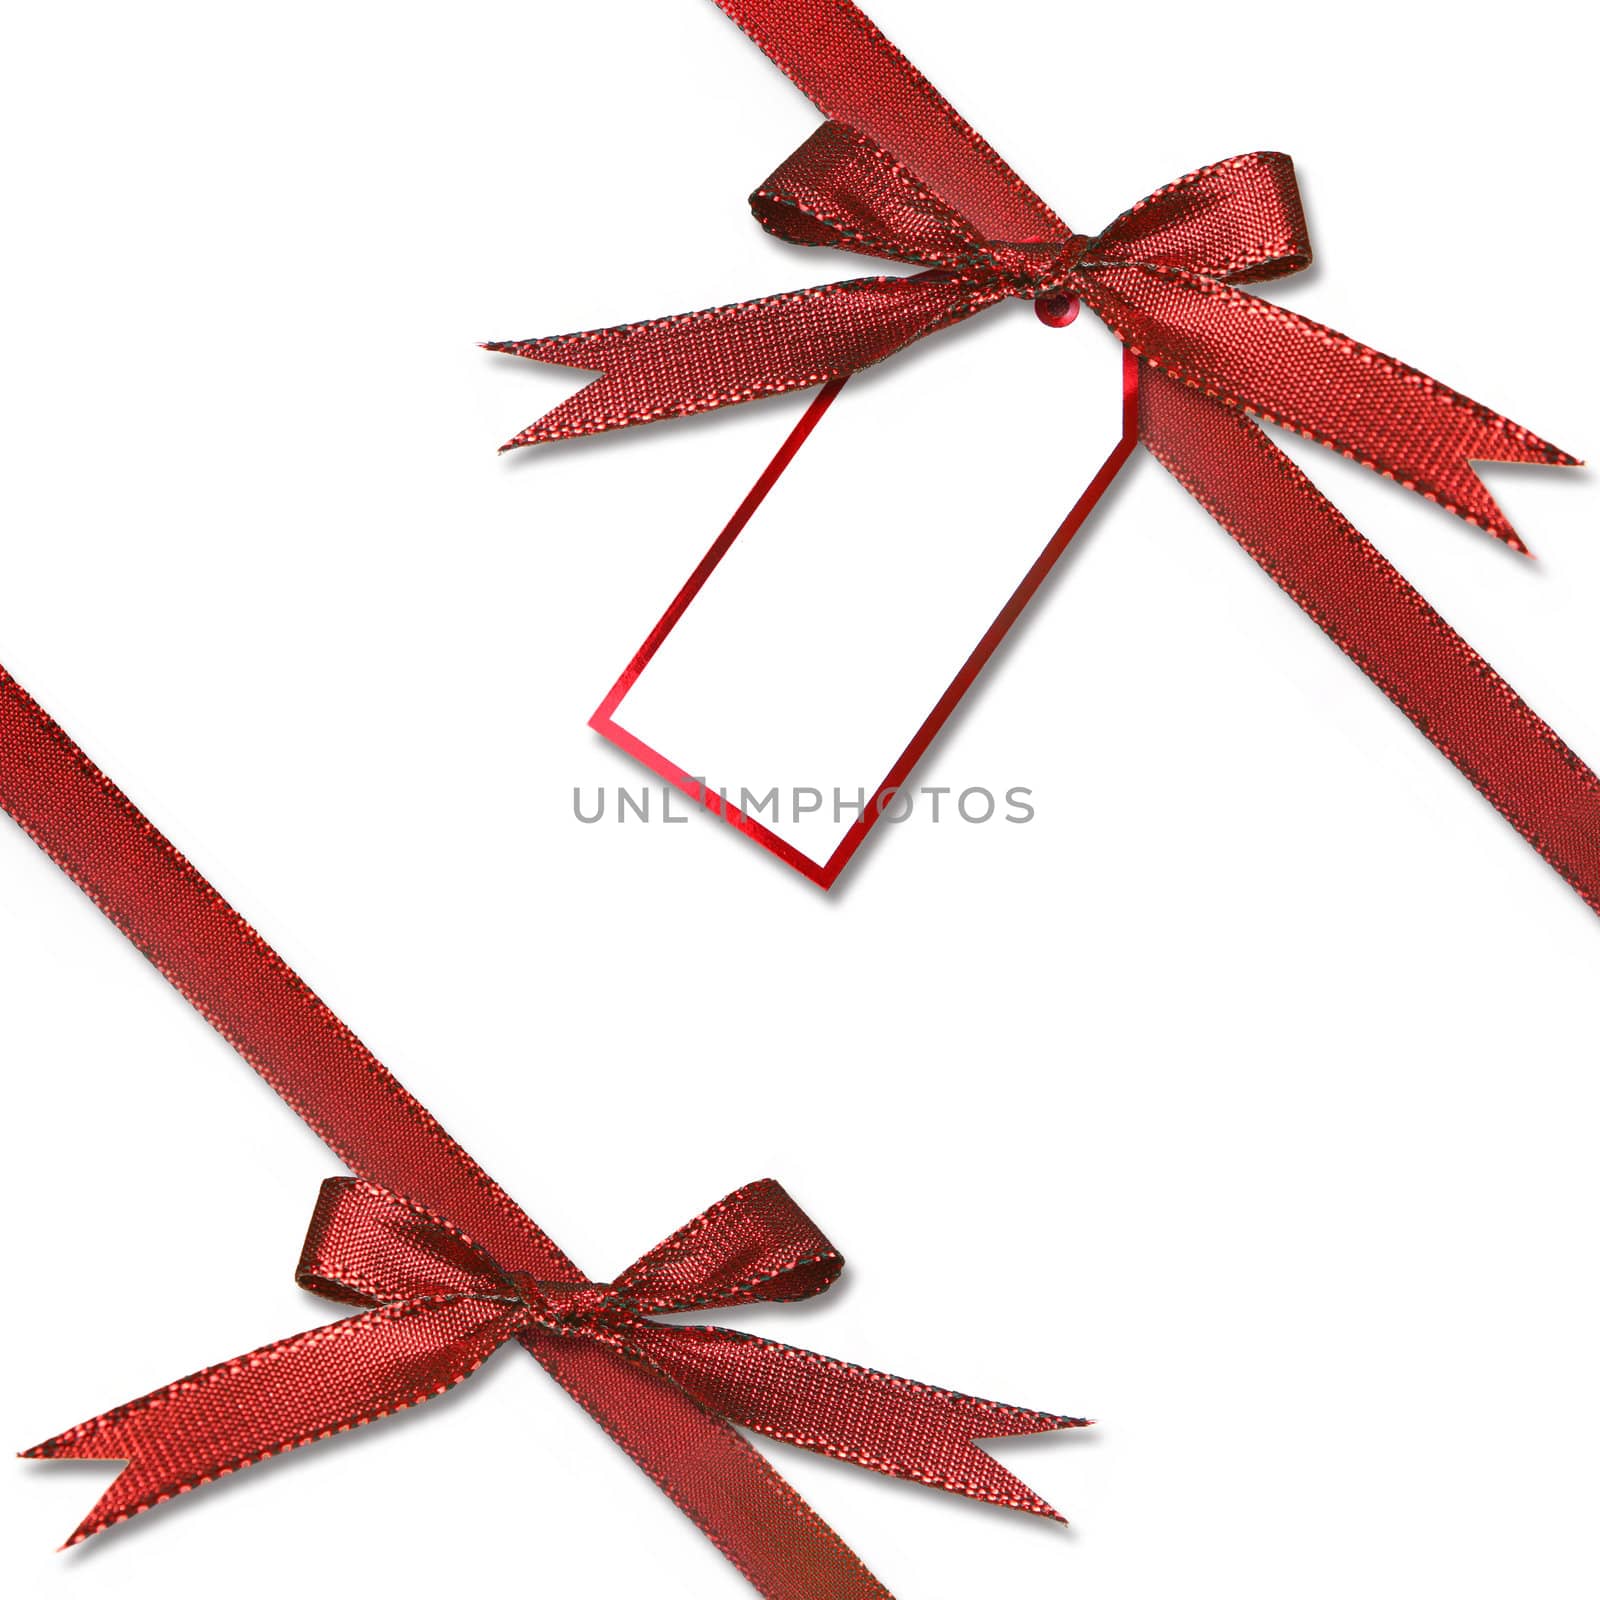 Christmas Gift Tag Hanging from a Present With Tied Red Bow